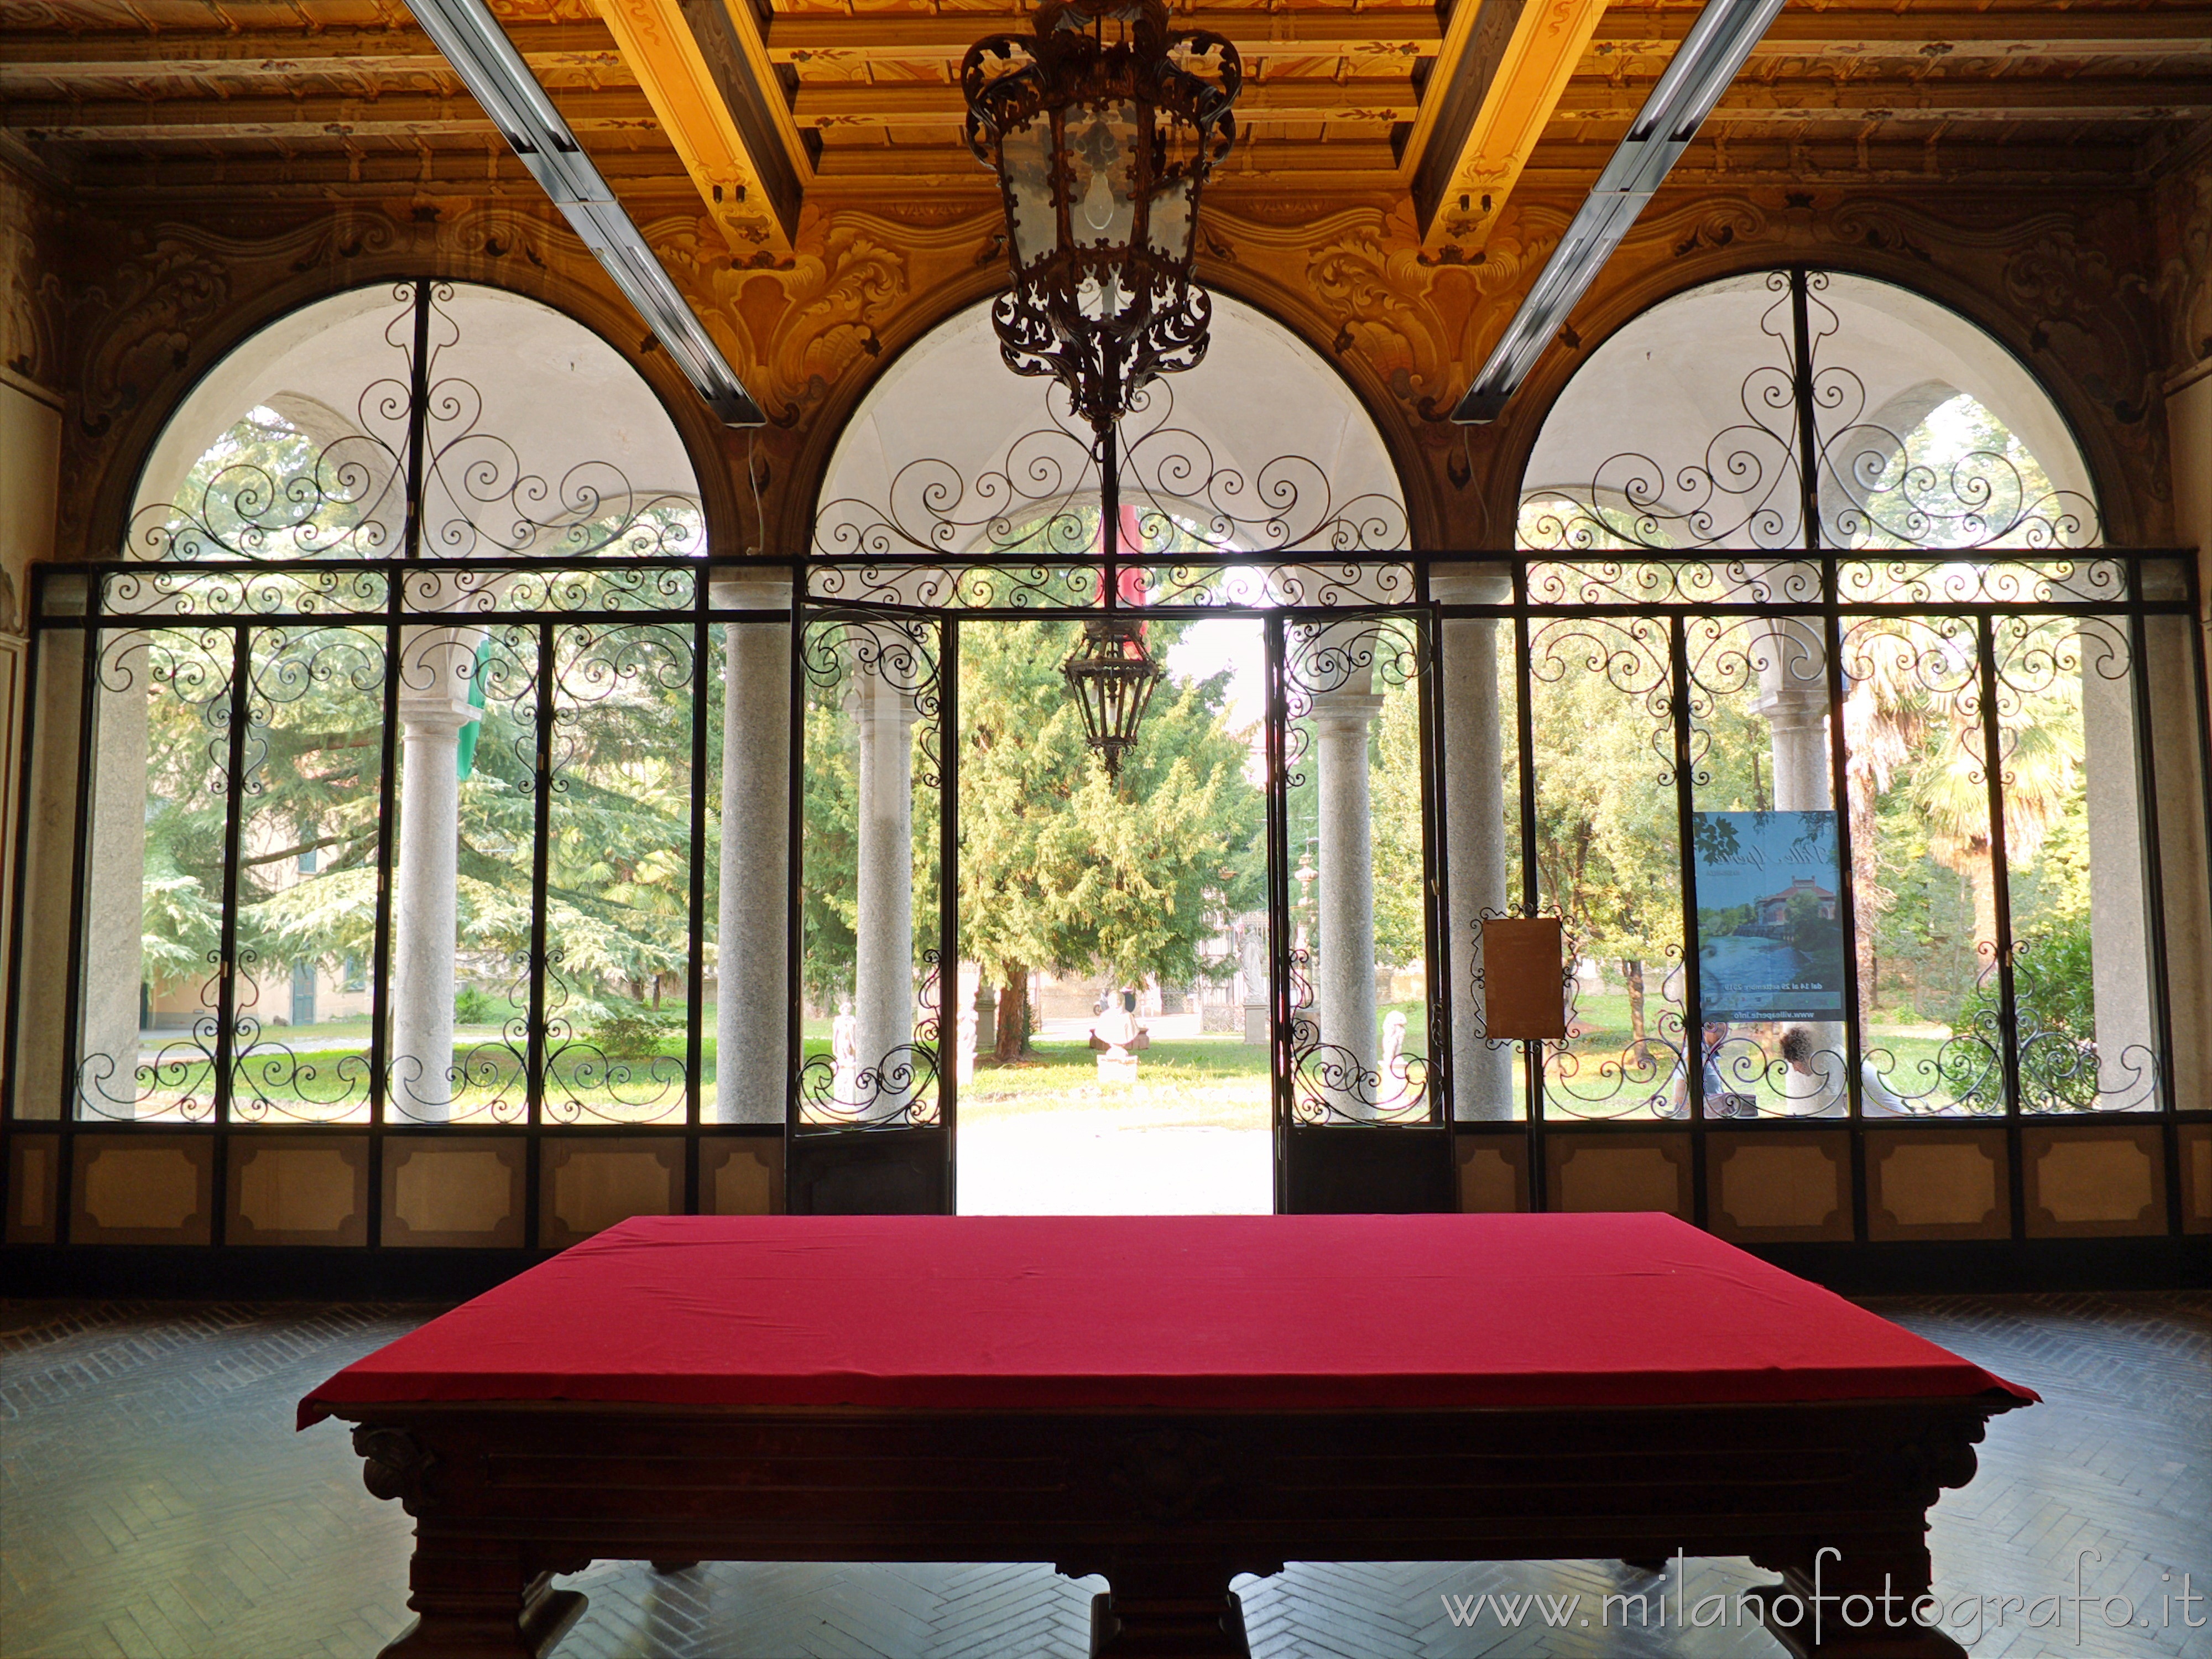 Merate (Lecco, Italy): The large window of the entrance hall of Villa Confalonieri - Merate (Lecco, Italy)